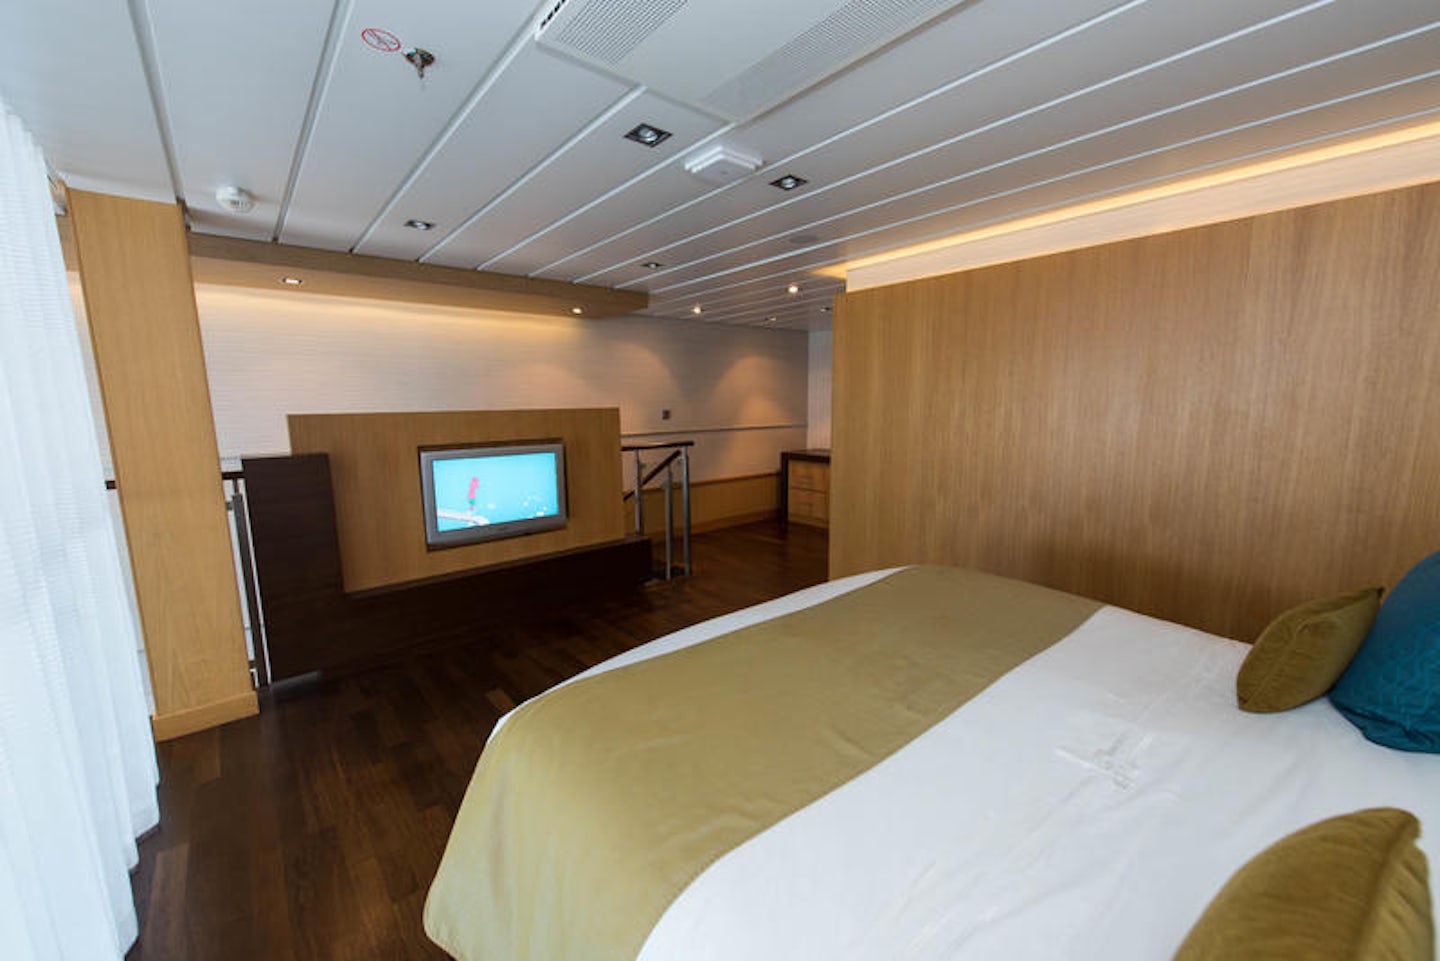 The Sky Loft Suite with Balcony on Oasis of the Seas